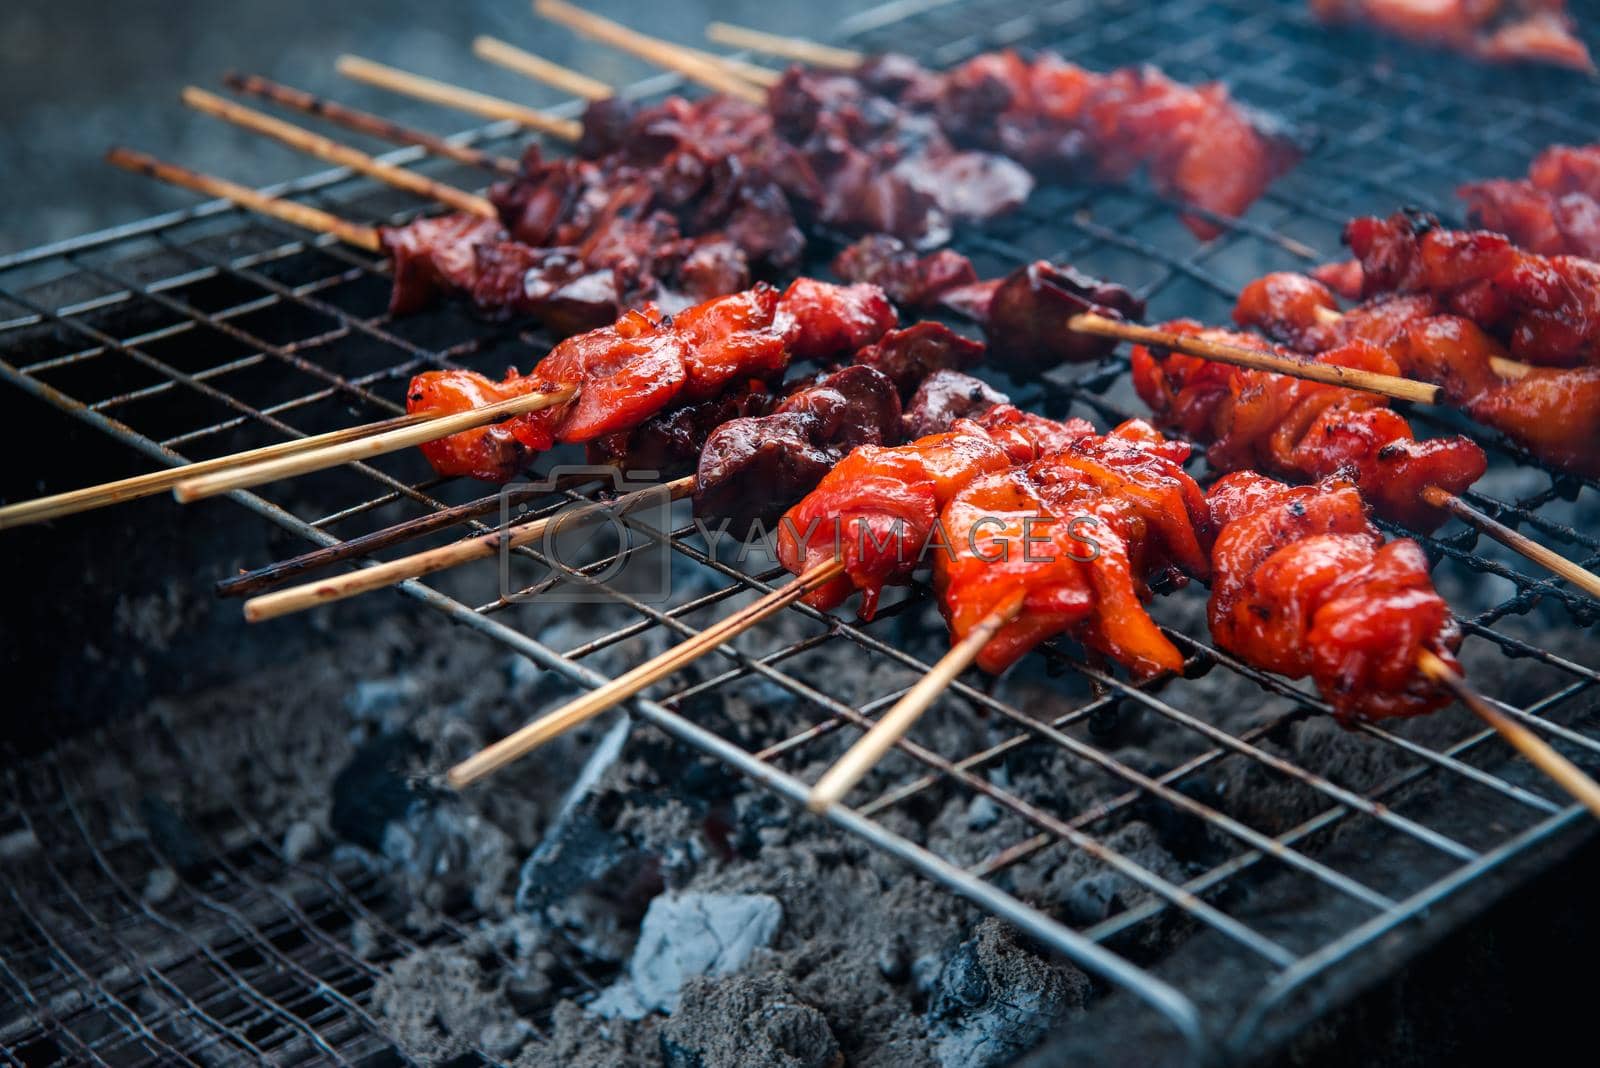 Grilled chicken sauce is a Thai barbeque food by chicken and sauce cooking on charcoal with flames at Thai street food market